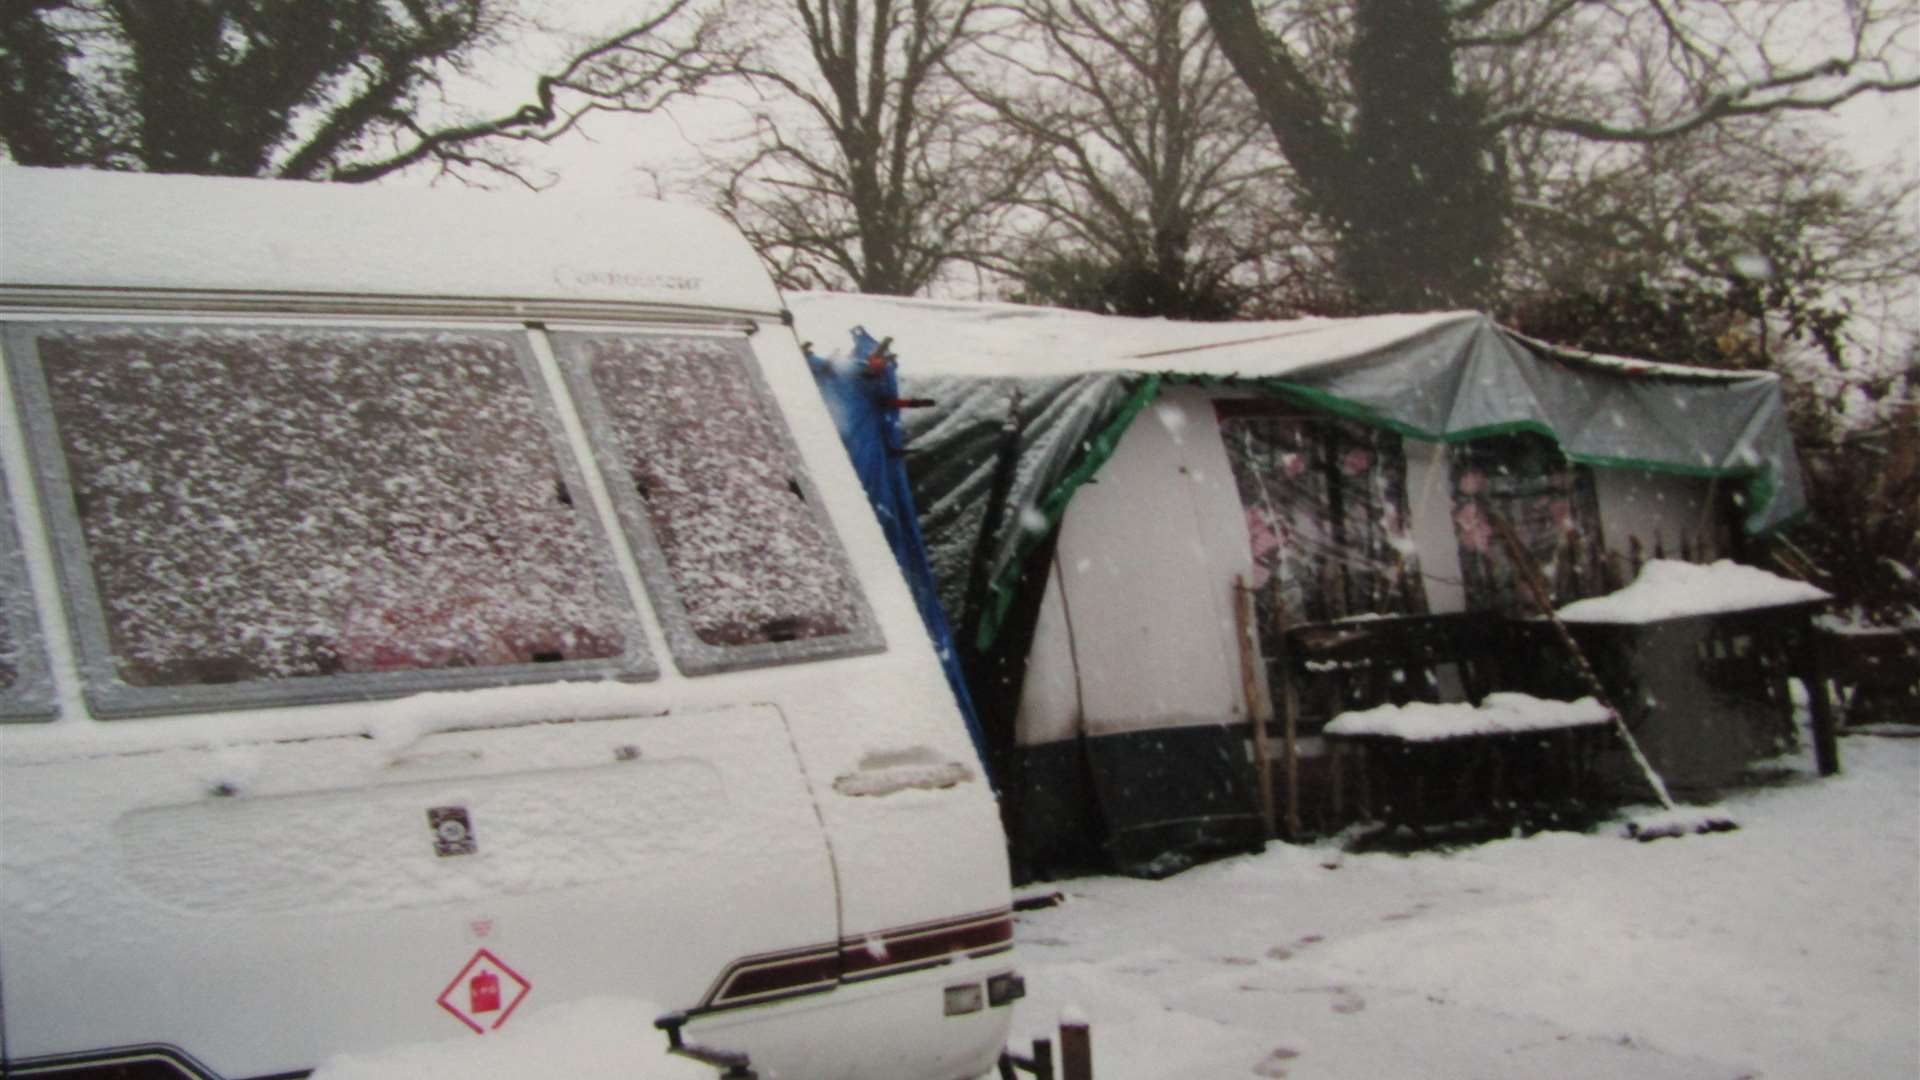 The family endured a bitter winter holed up in their caravan while their home was being built